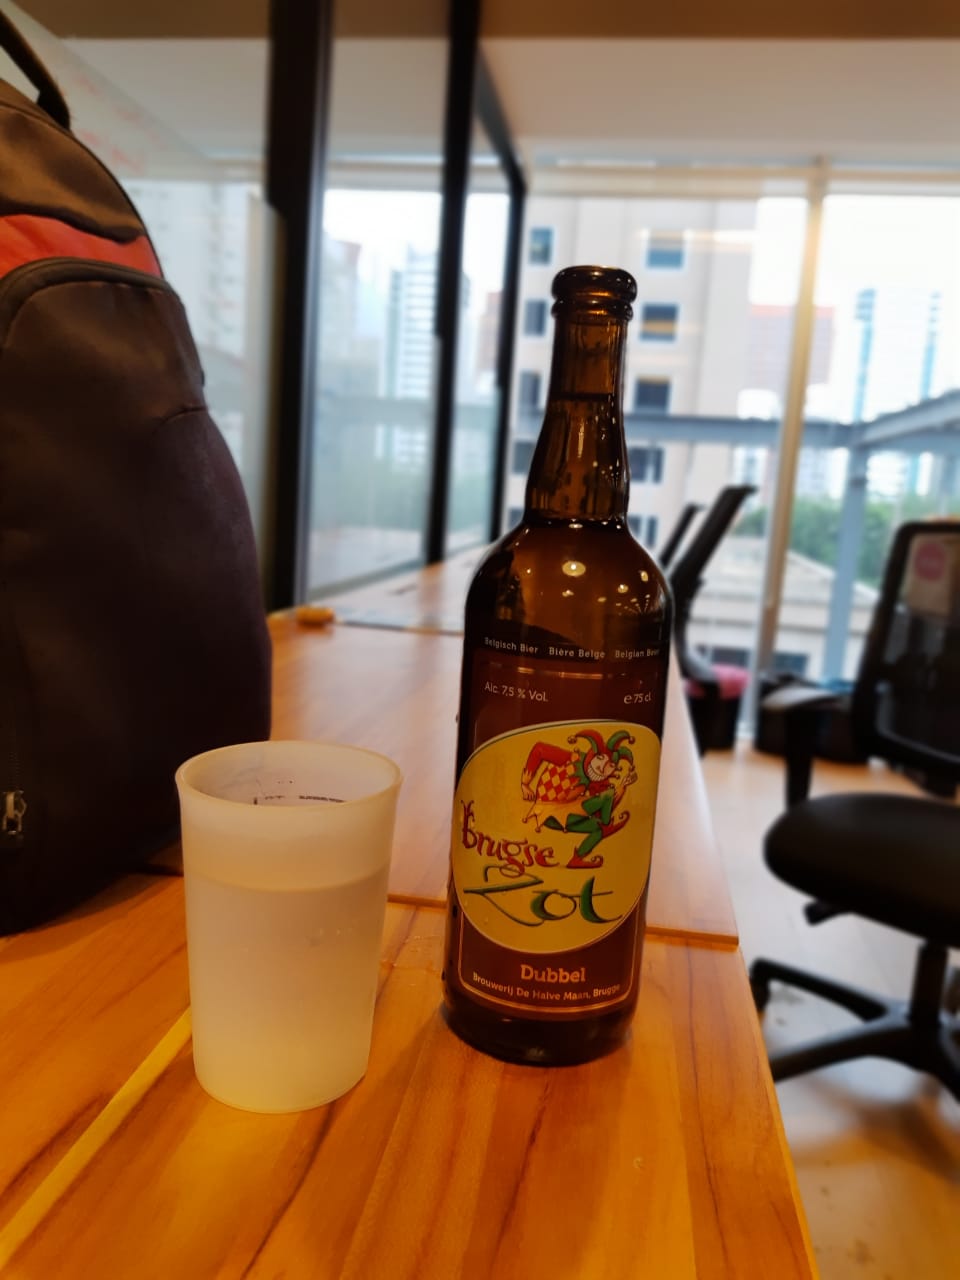 Bottle of the Bugse Zot beer fulfilled by water